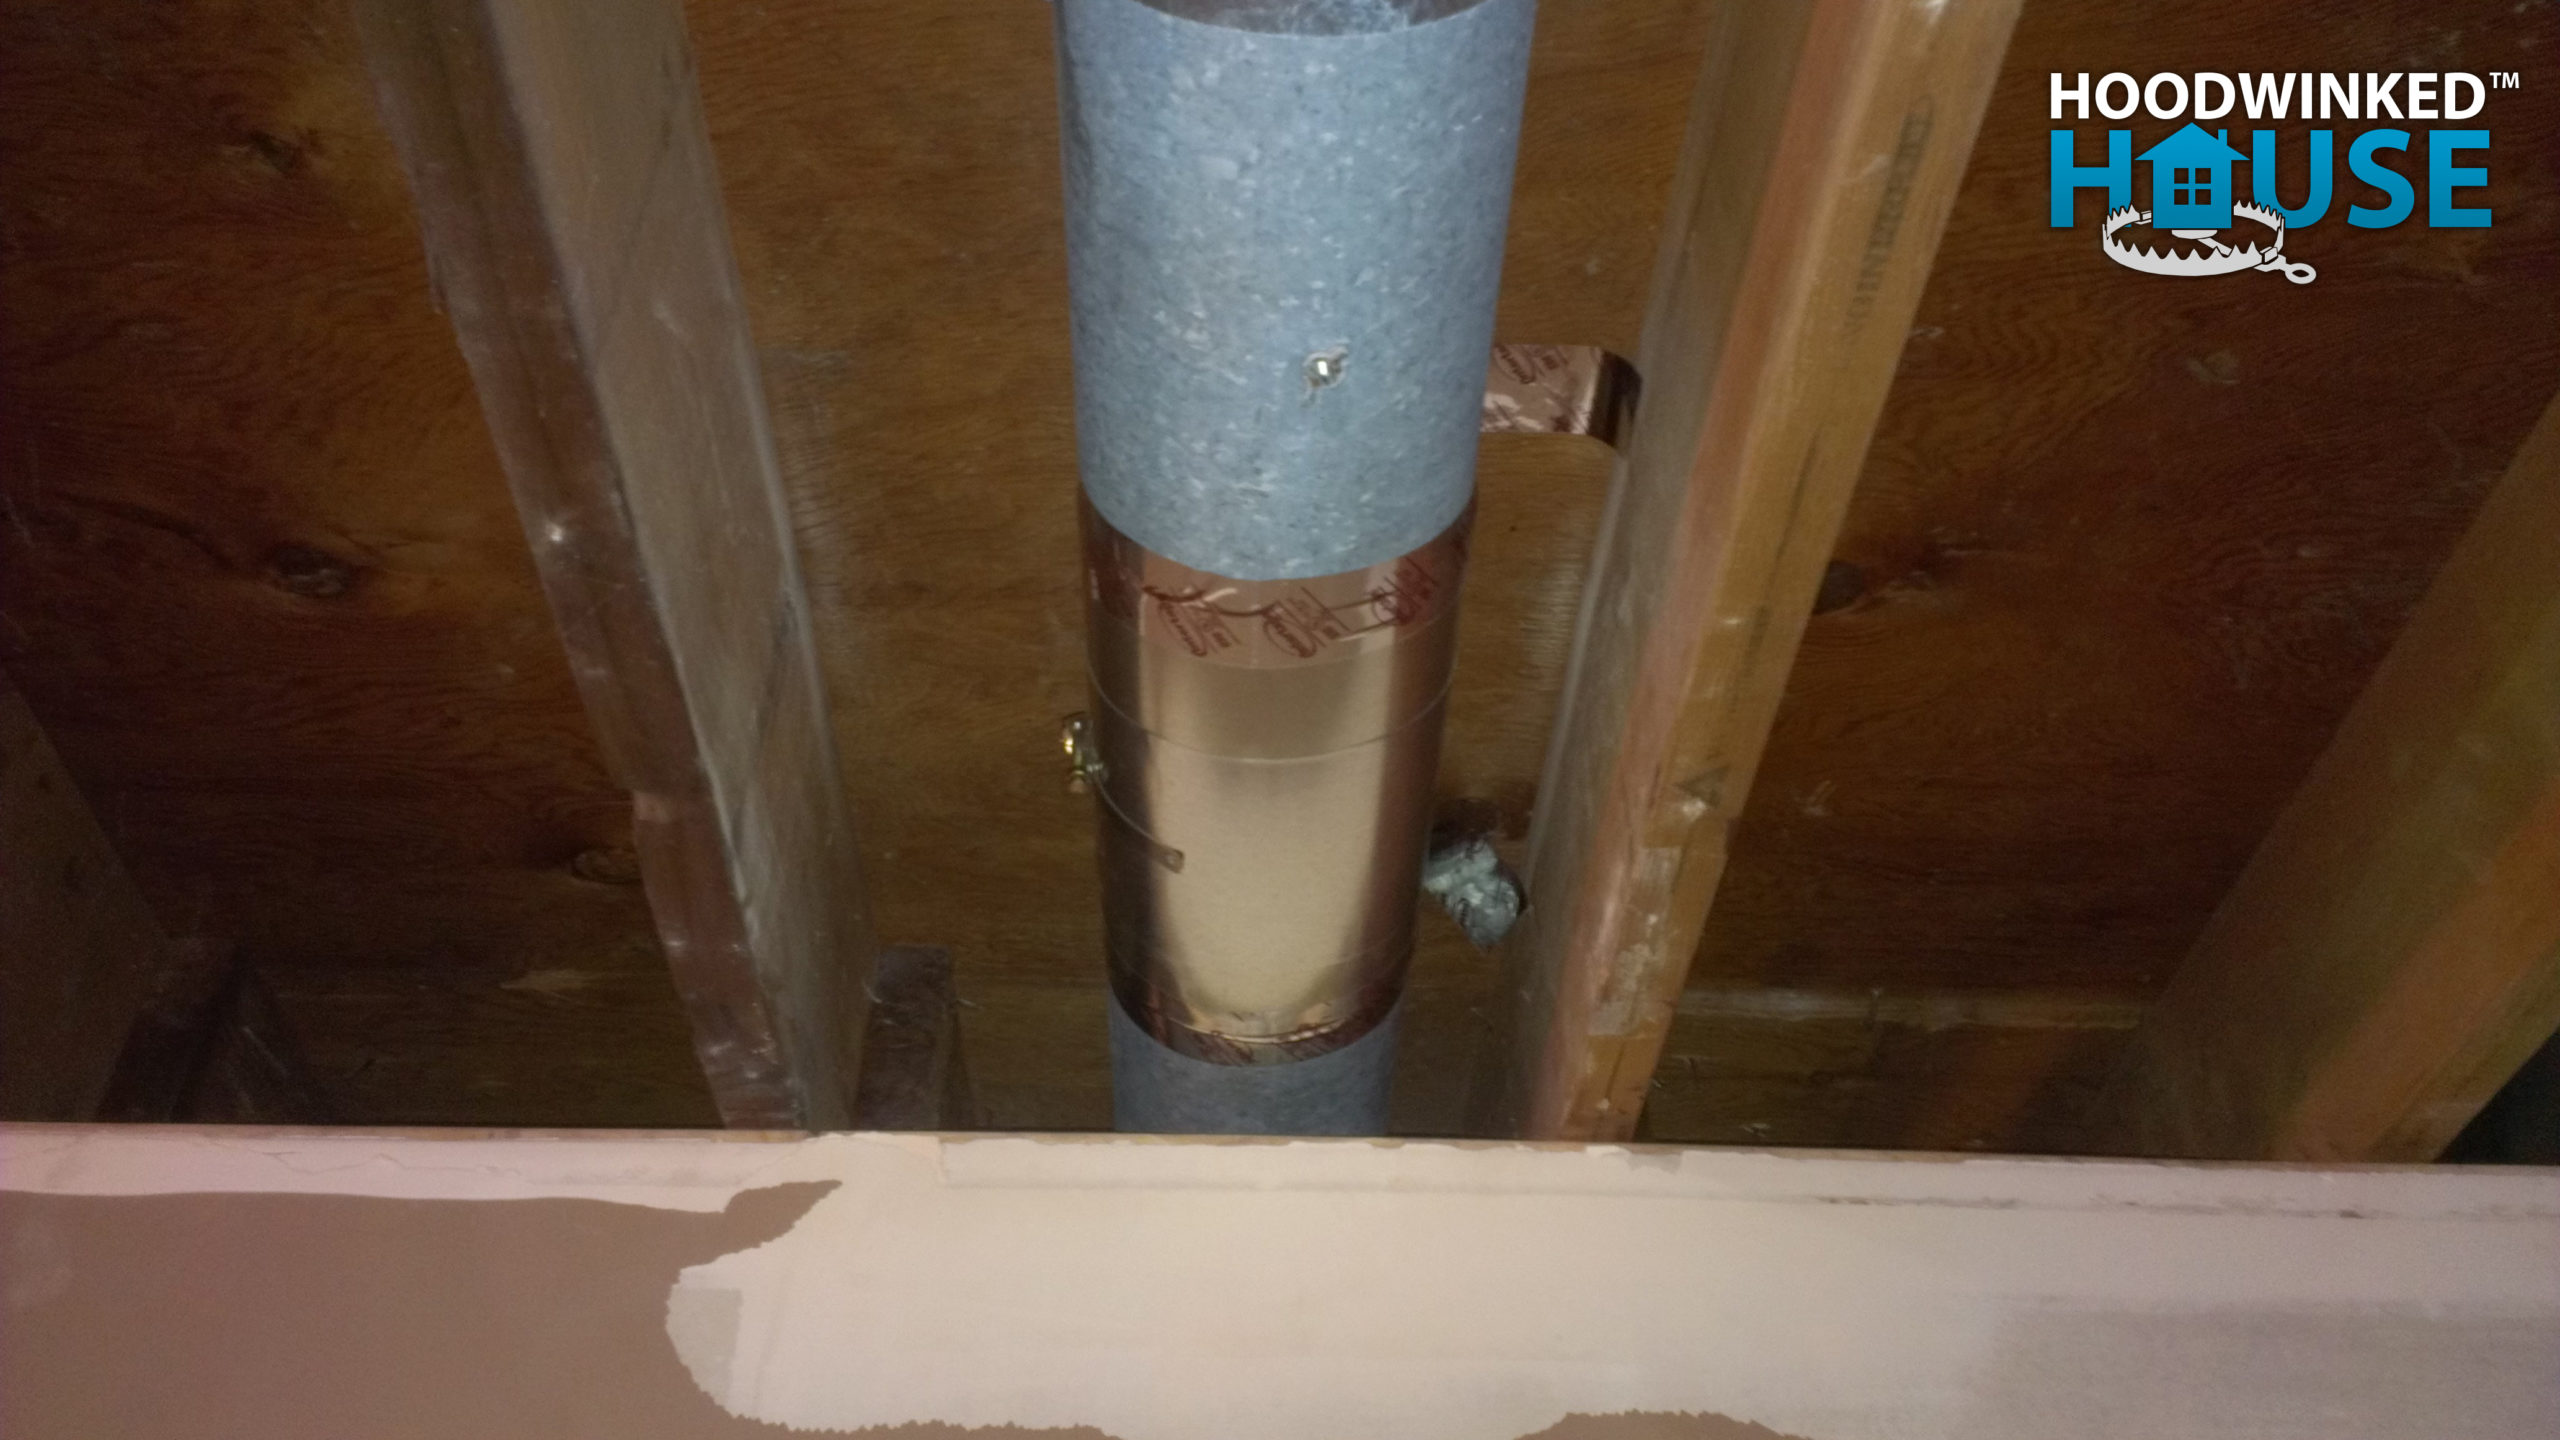 A basement air duct has been repaired with a patch.